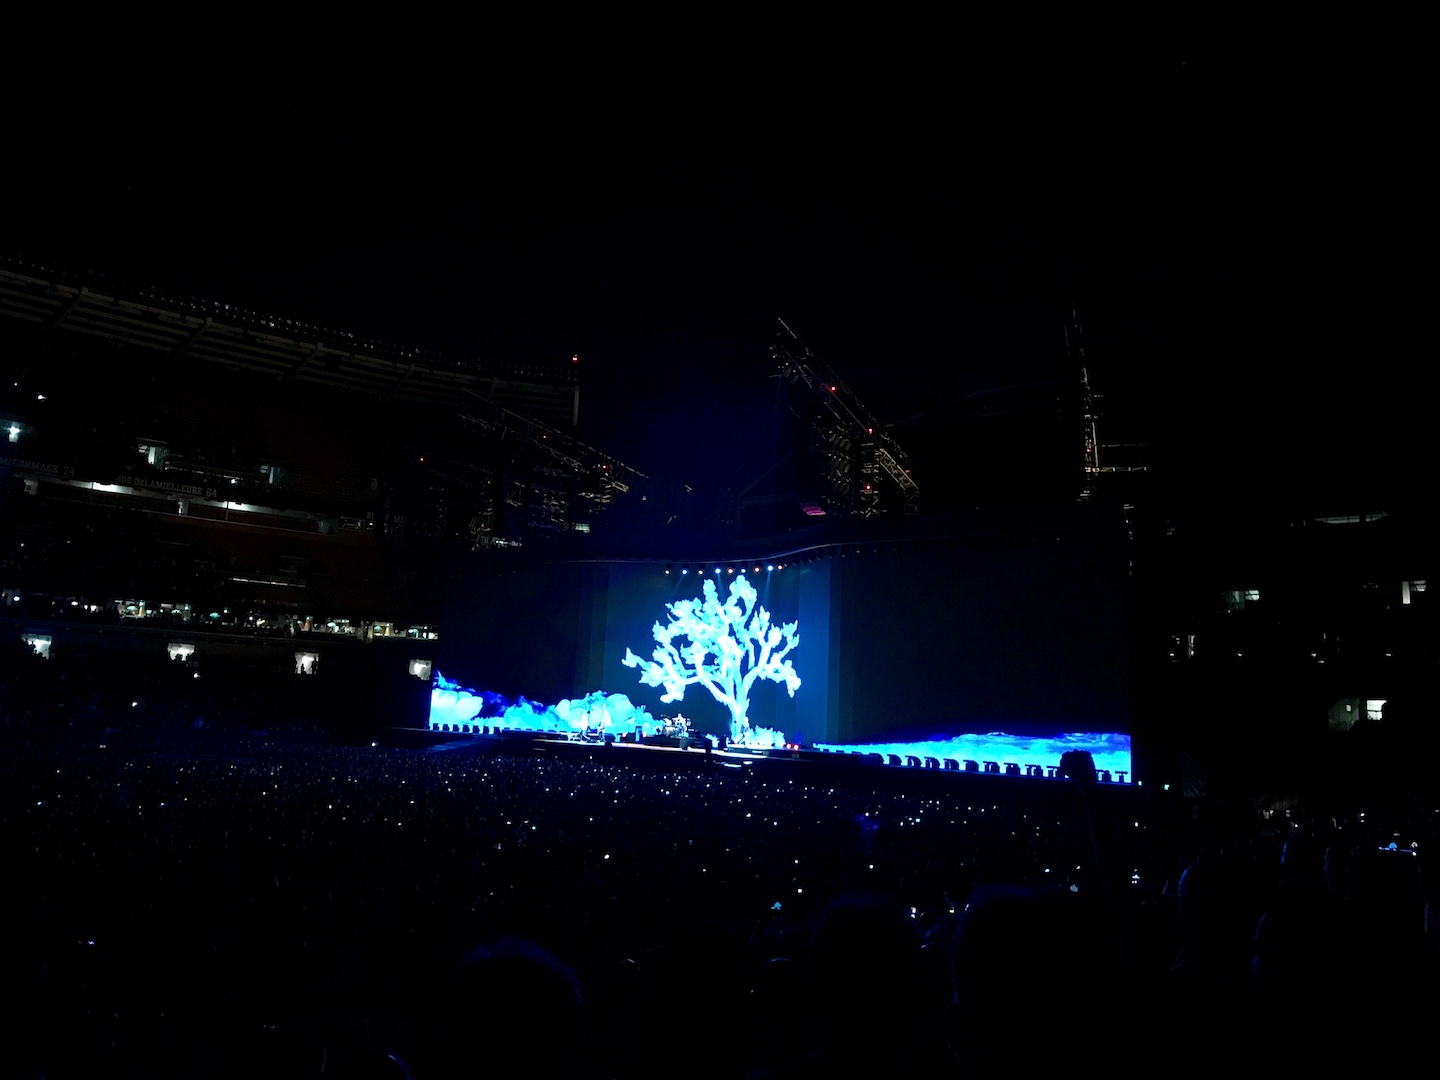 U2 on stage in Cleveland